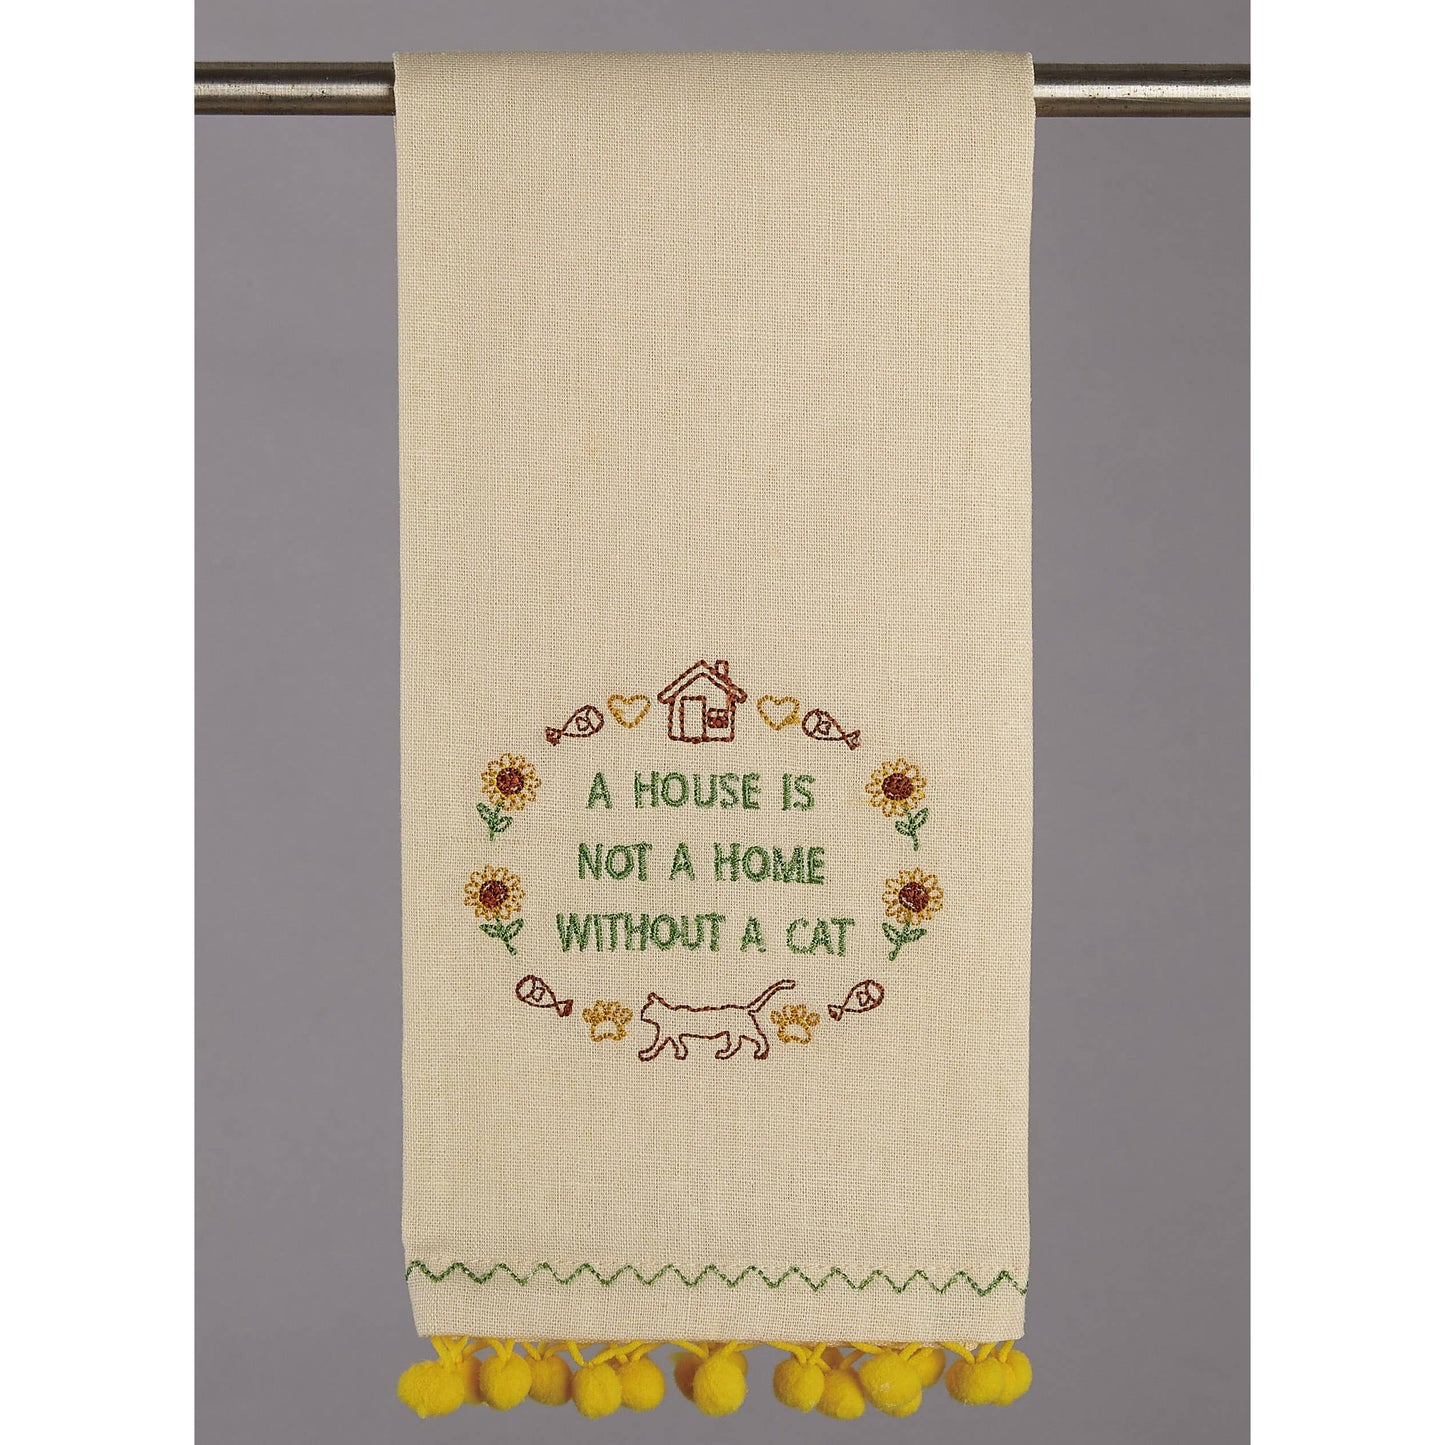 PEKING HANDICRAFT "Not a Home Without a Cat" Pom Pom Kitchen Towel